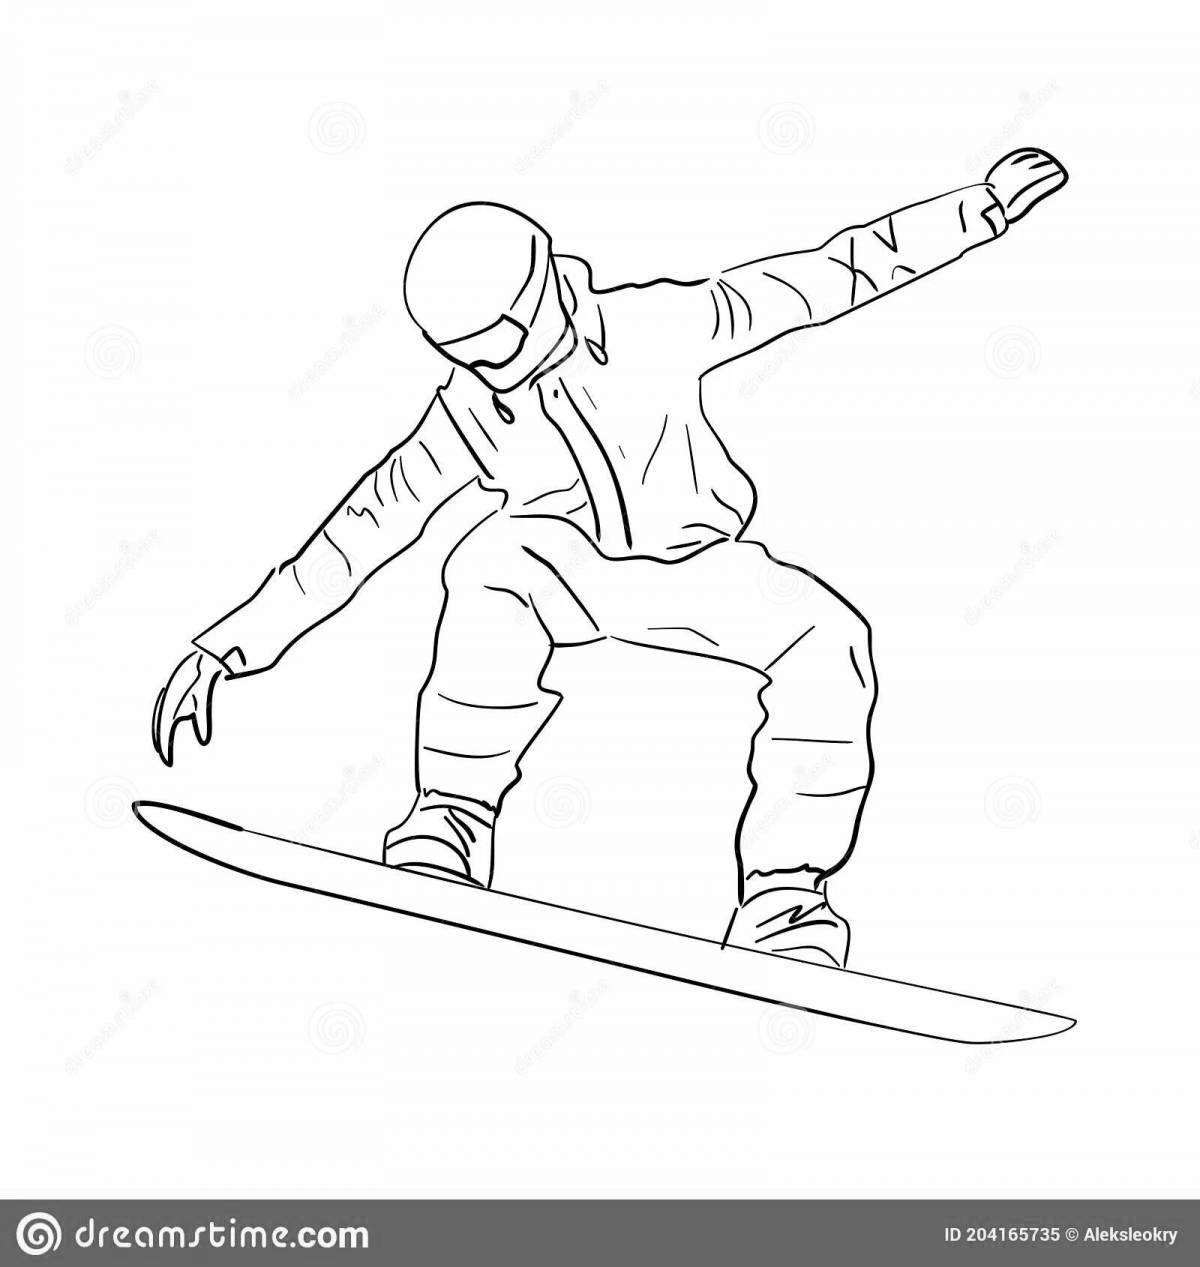 Dynamic snowboard coloring page for kids